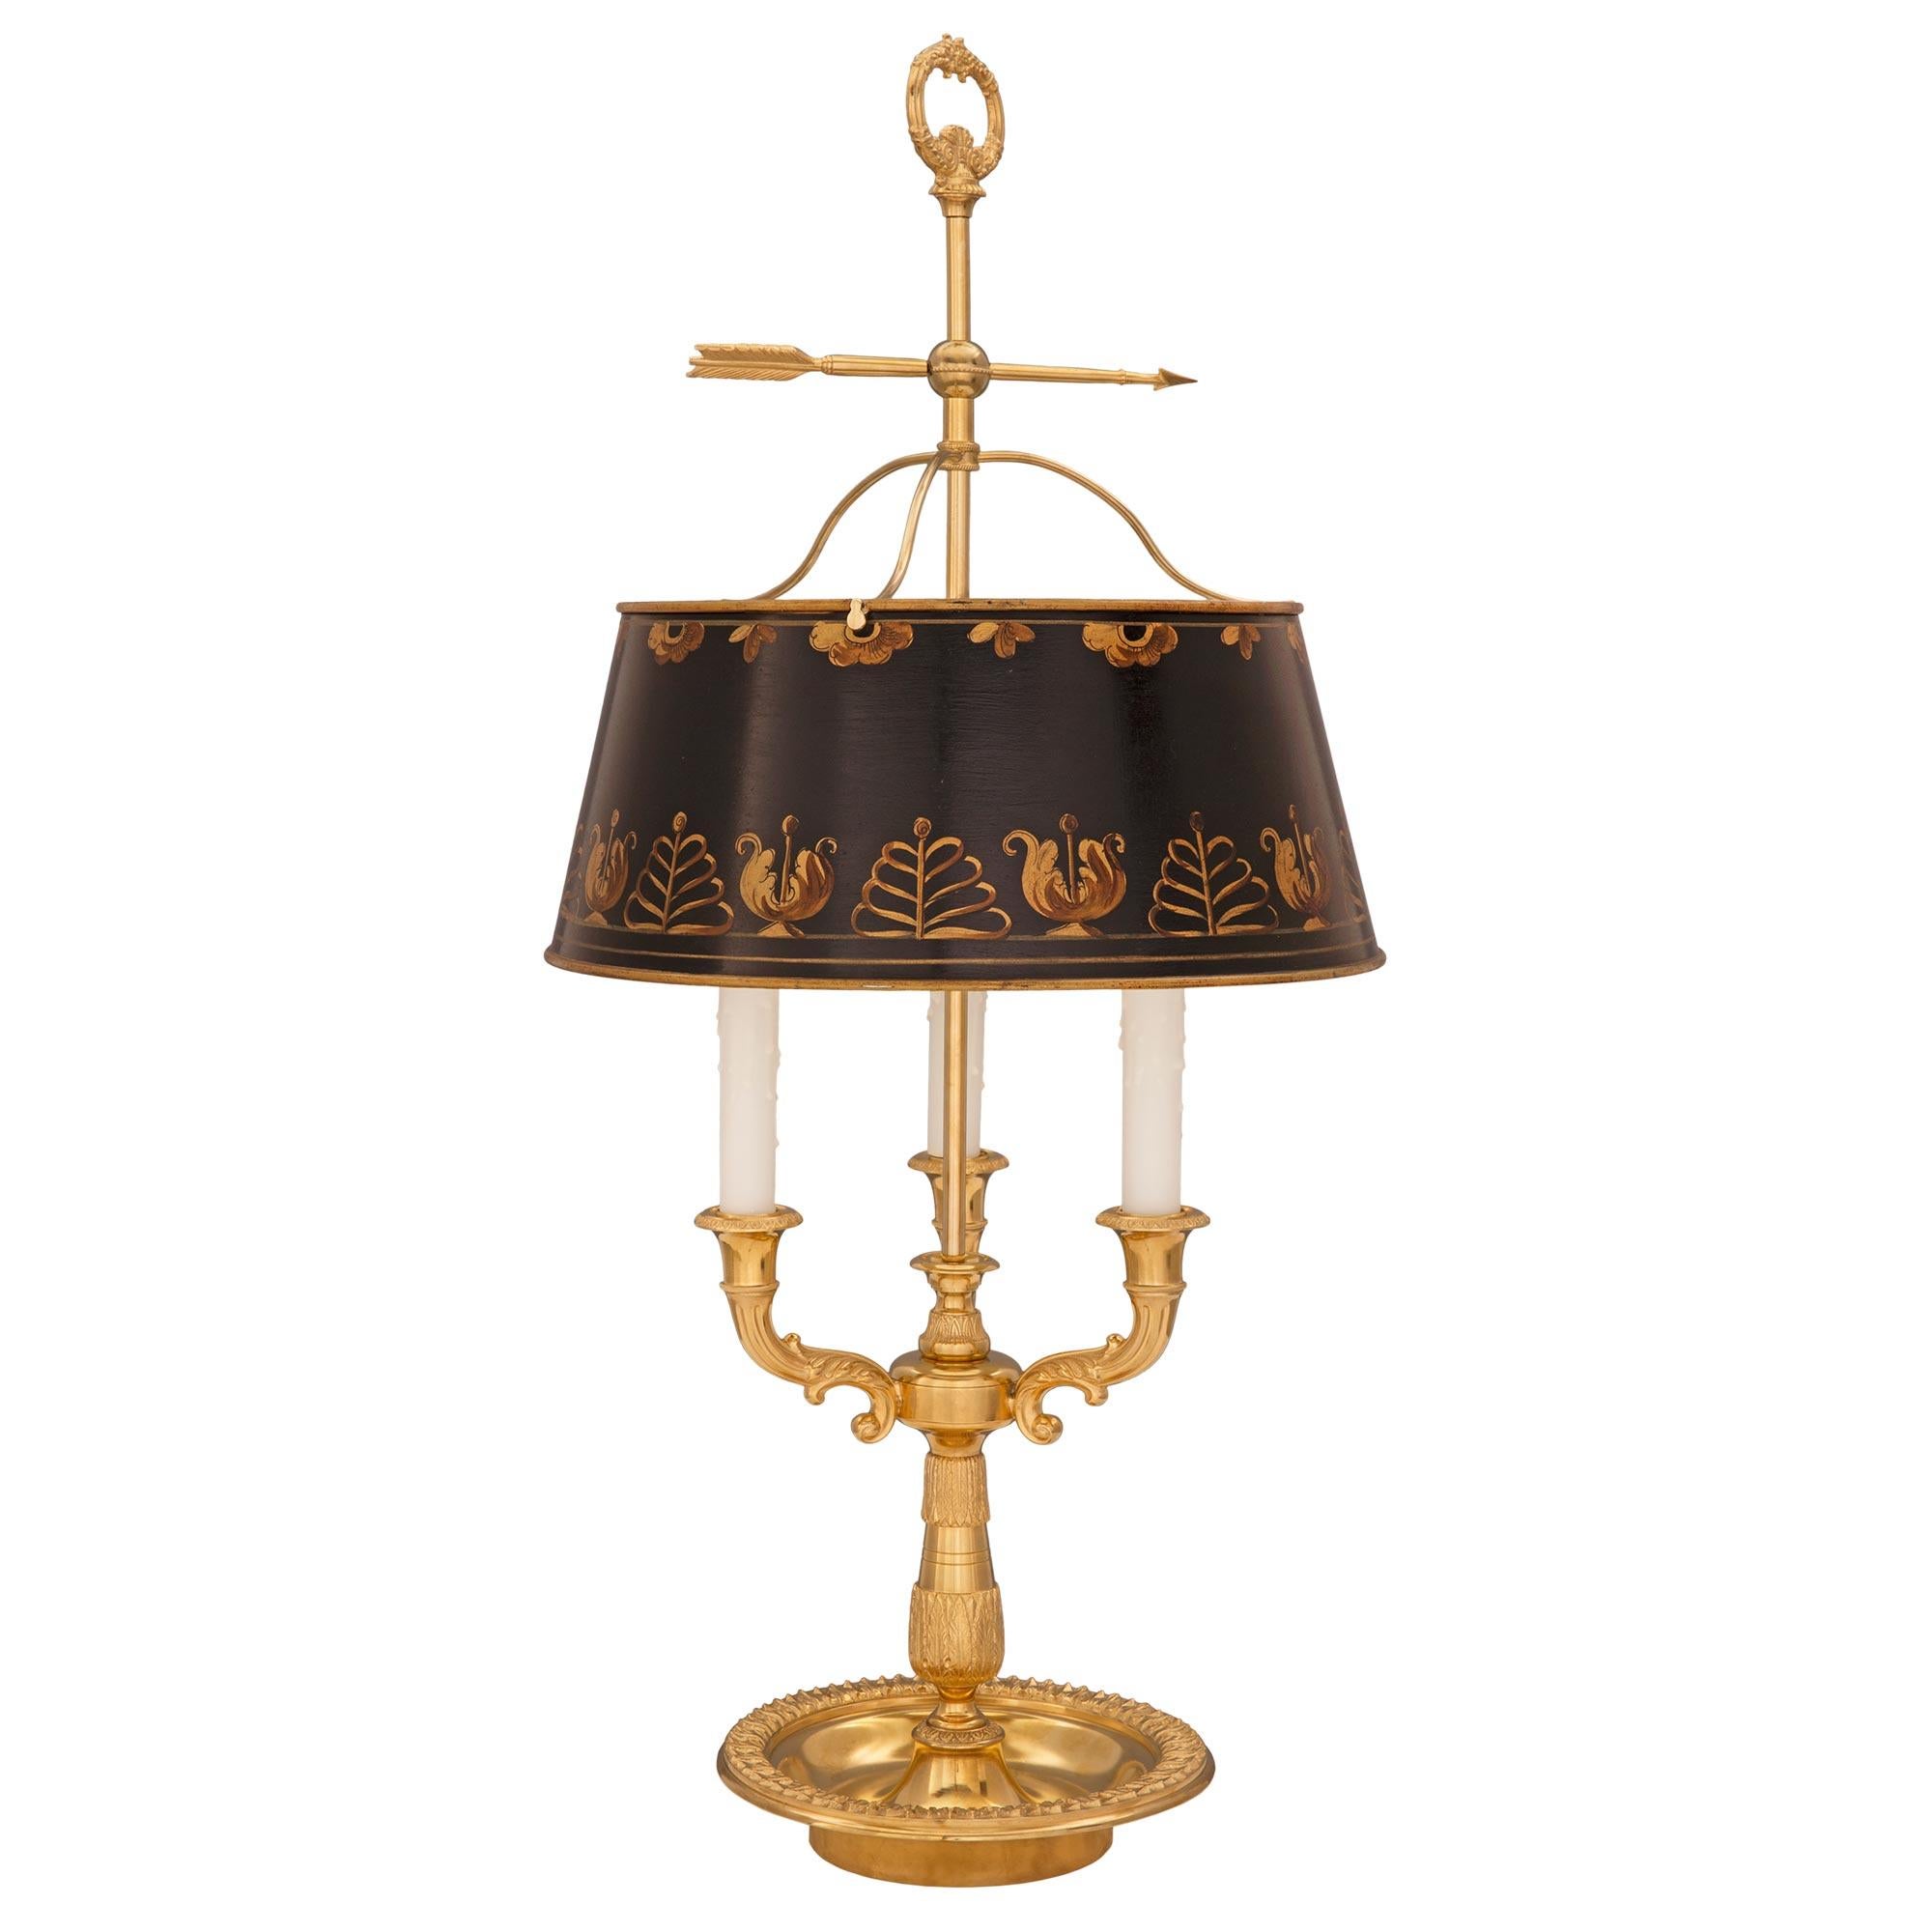 An elegant French 19th century Louis XVI st. ormolu and tole Bouillotte lamp. The charming lamp is raised by a circular bowl shaped base with a lovely wrap around foliate band. The circular central support displays an elegantly tapered design with